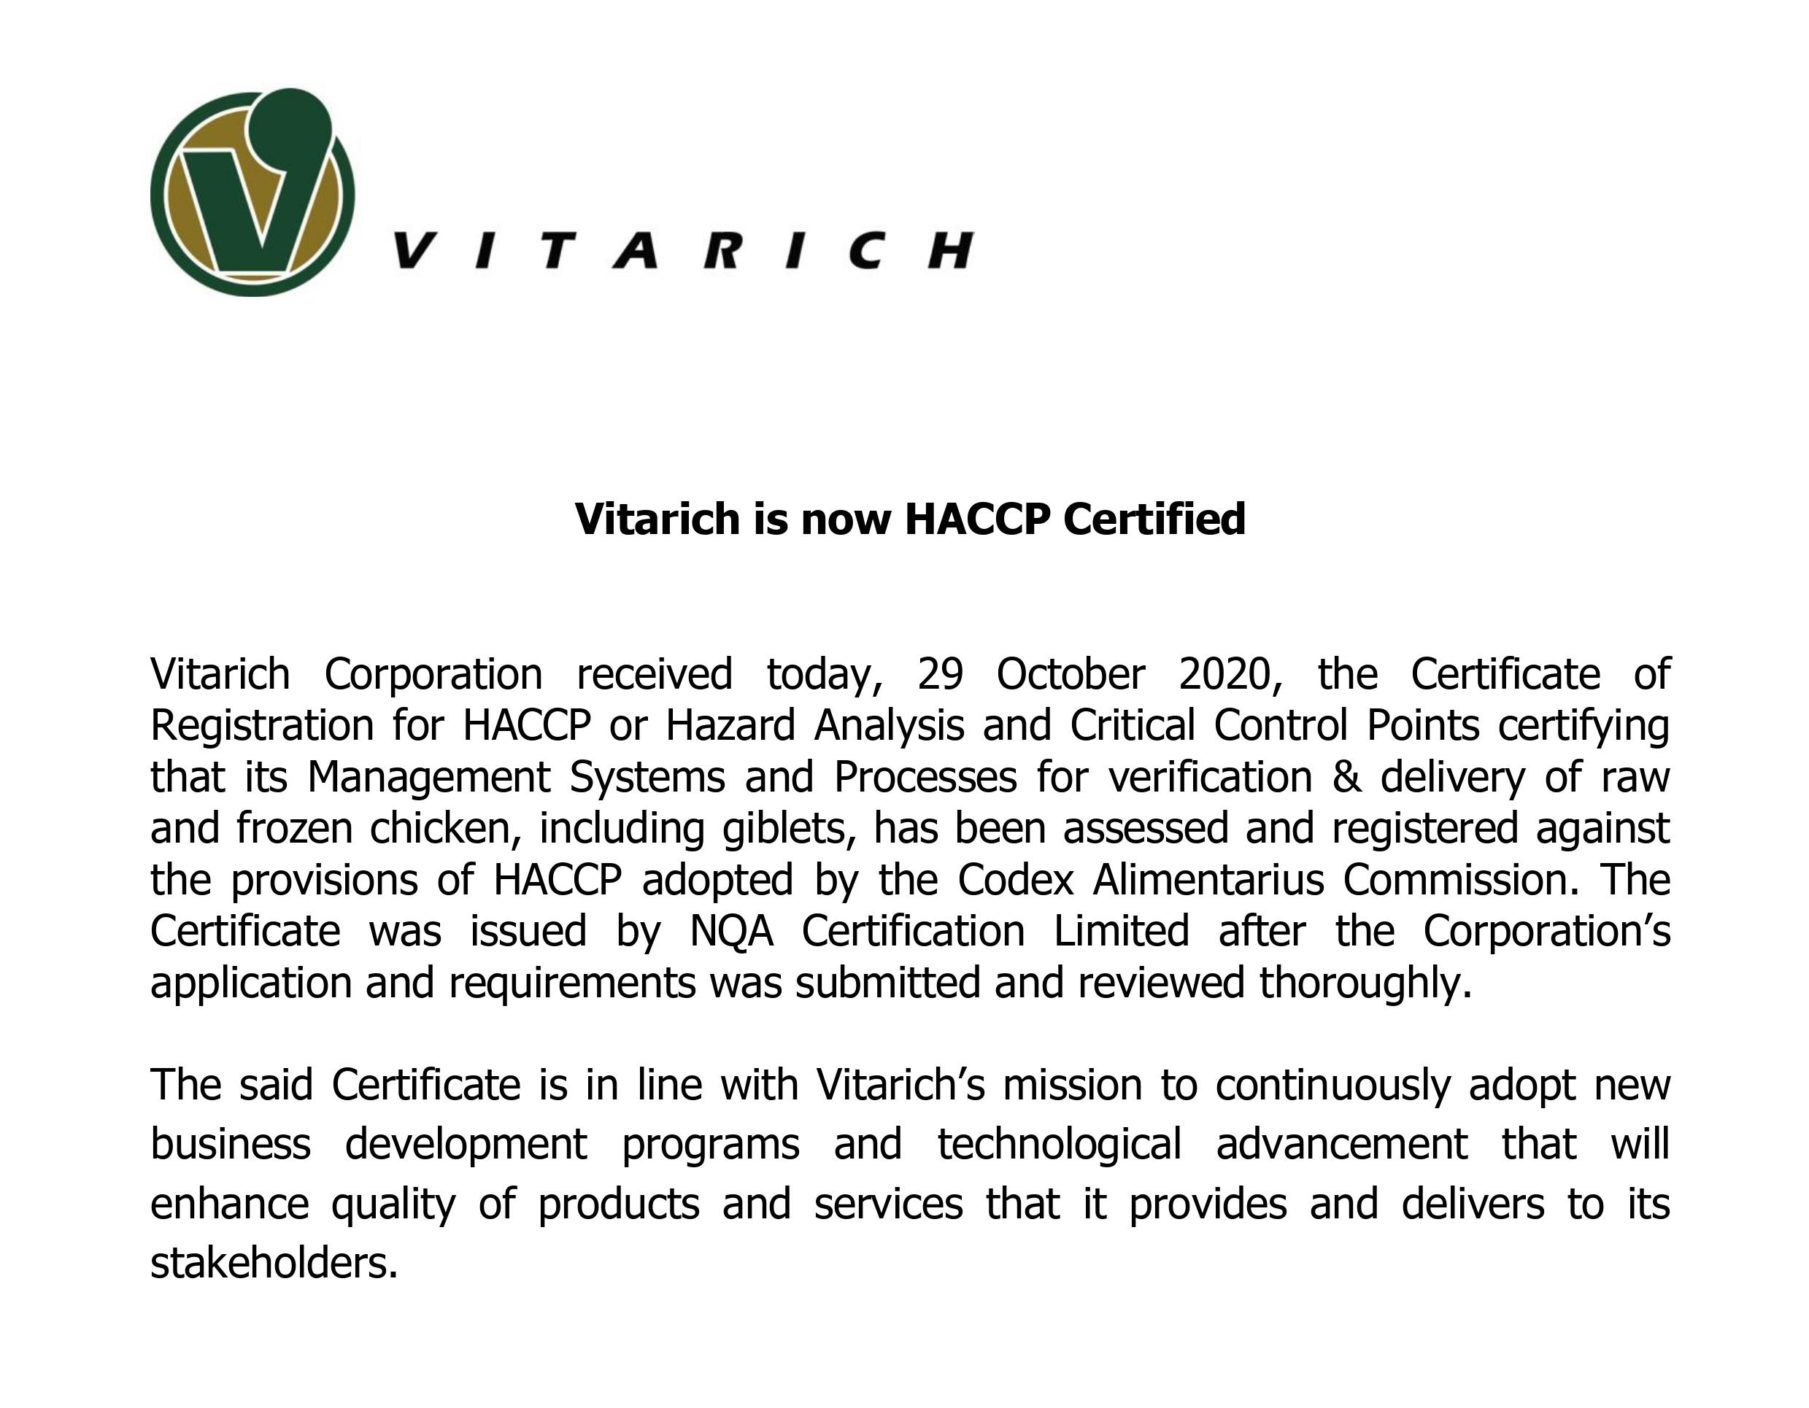 Vitarich Corporation received HACCP Certification on October 29, 2020